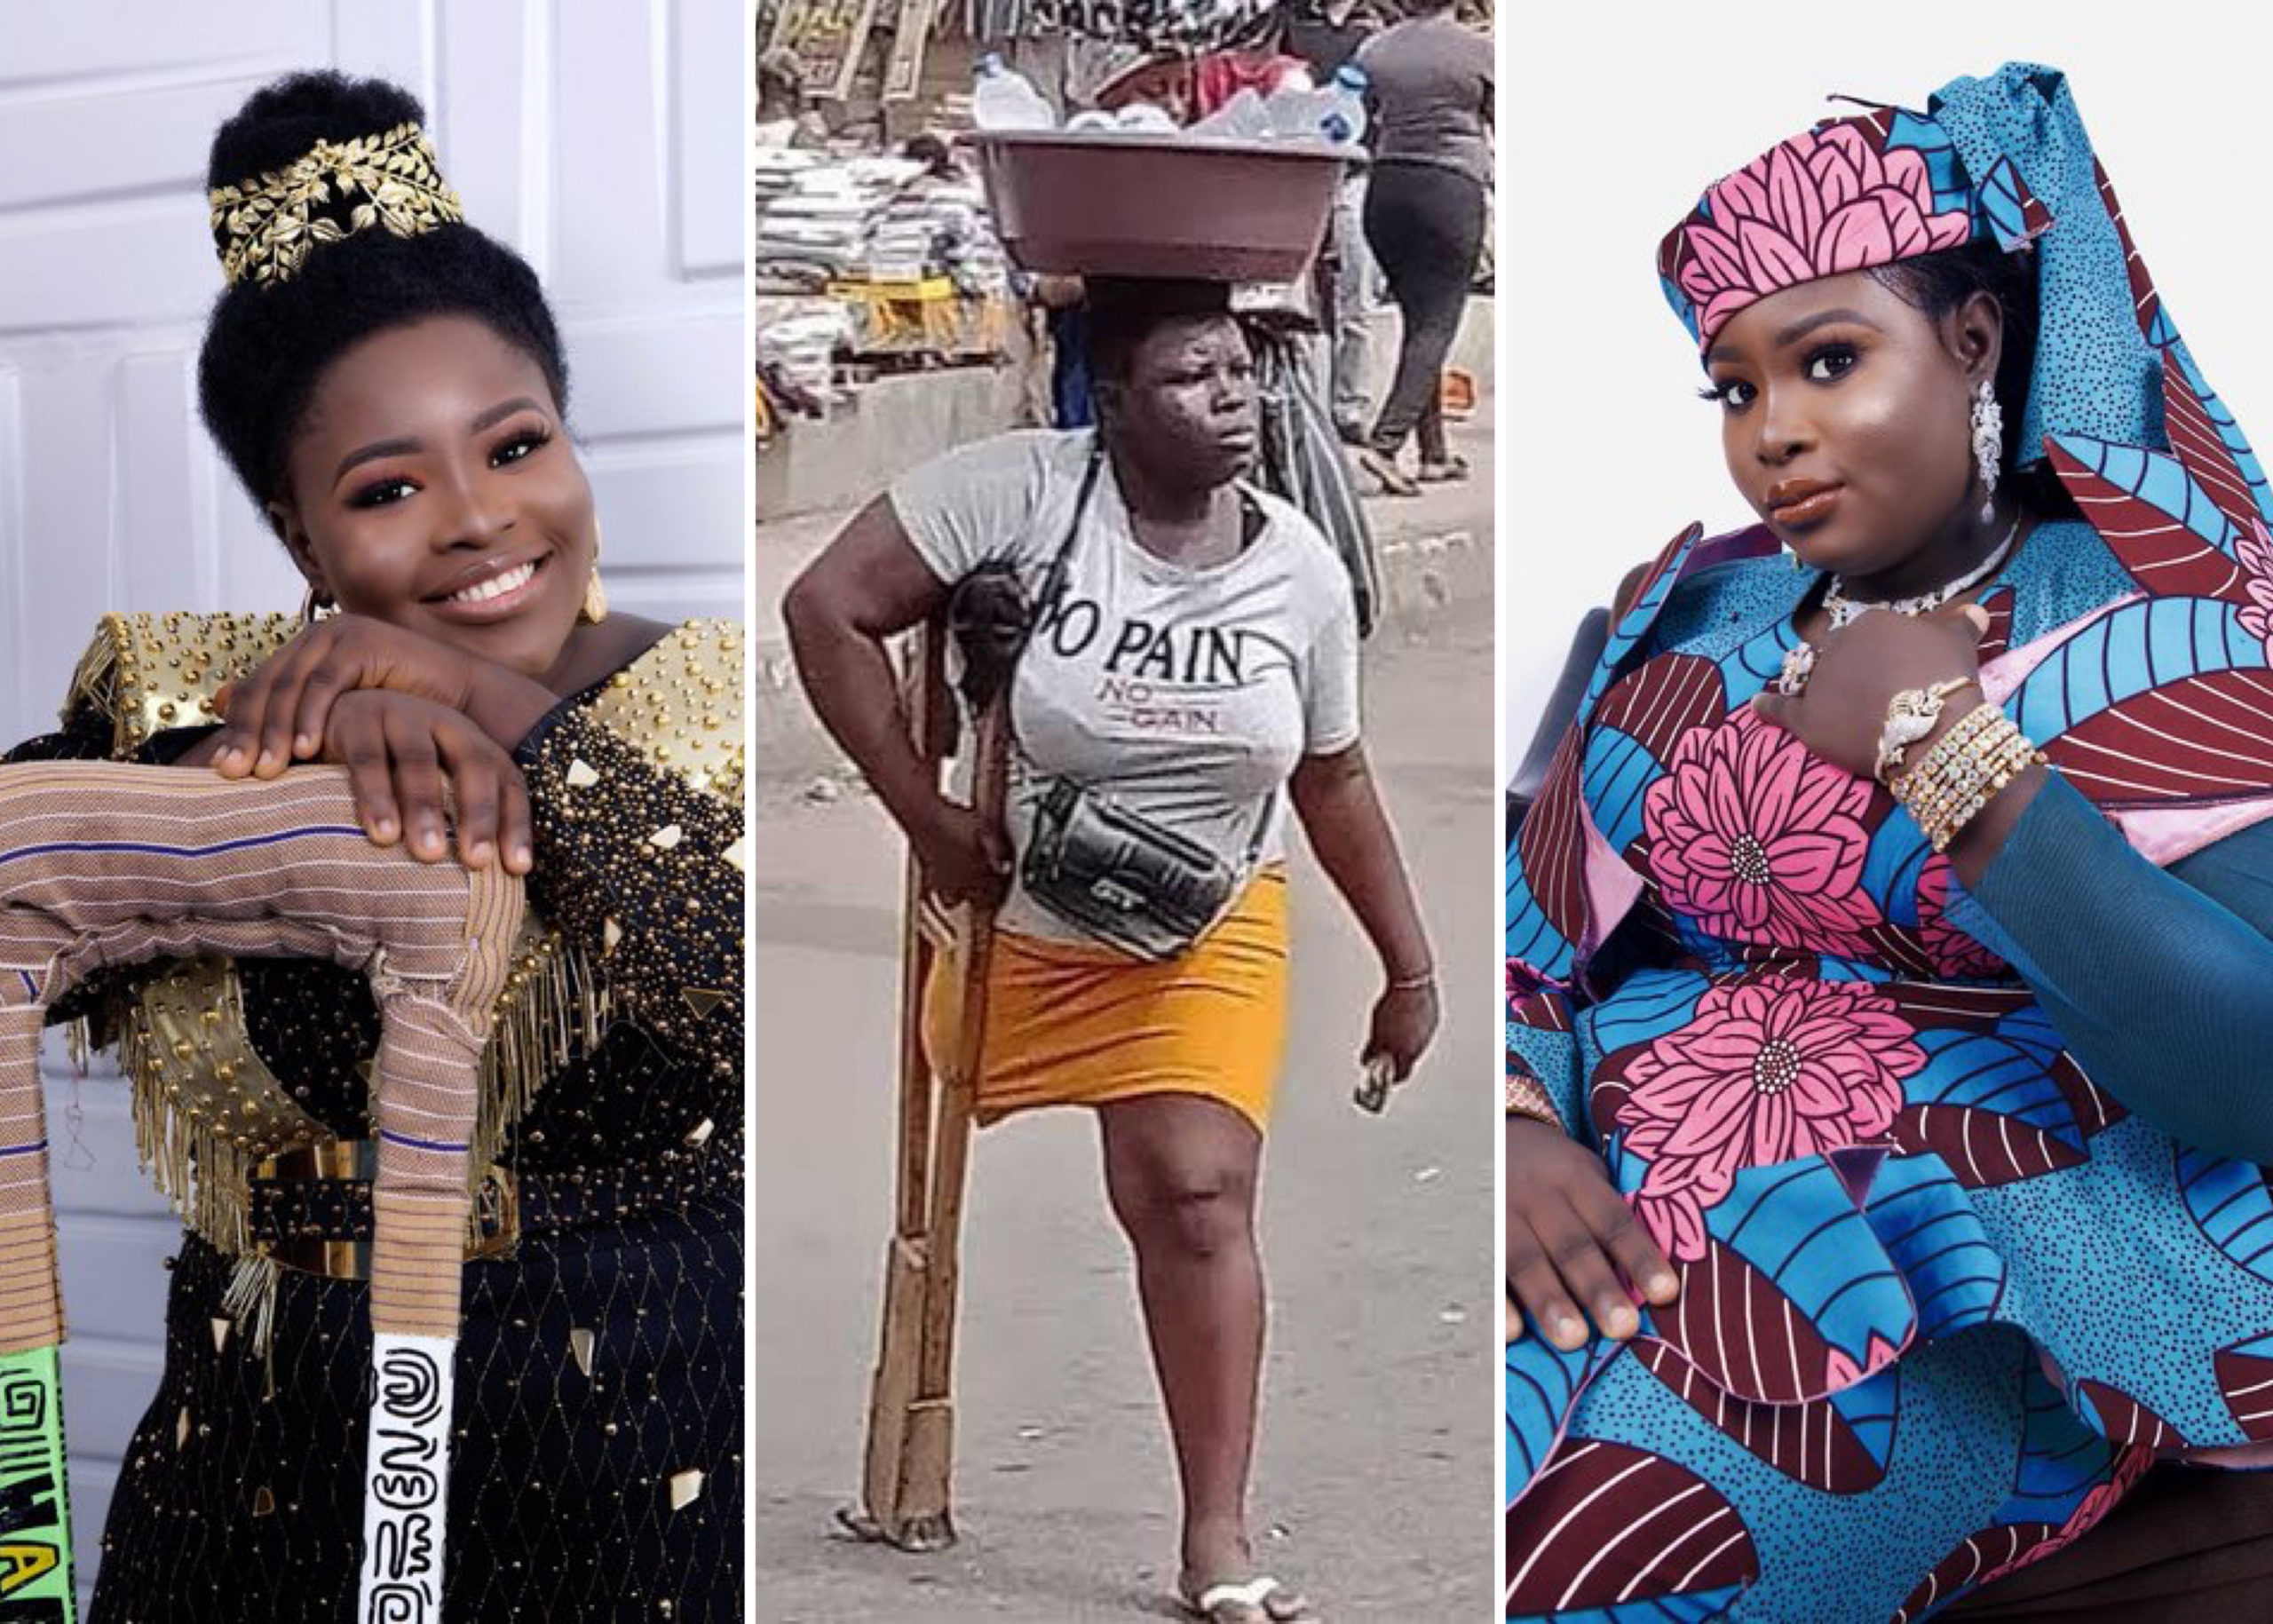 Amputee Woman, Who Went Viral For Hawking Despite Disability, Shares Amazing Transformation Photos To Mark 27th Birthday